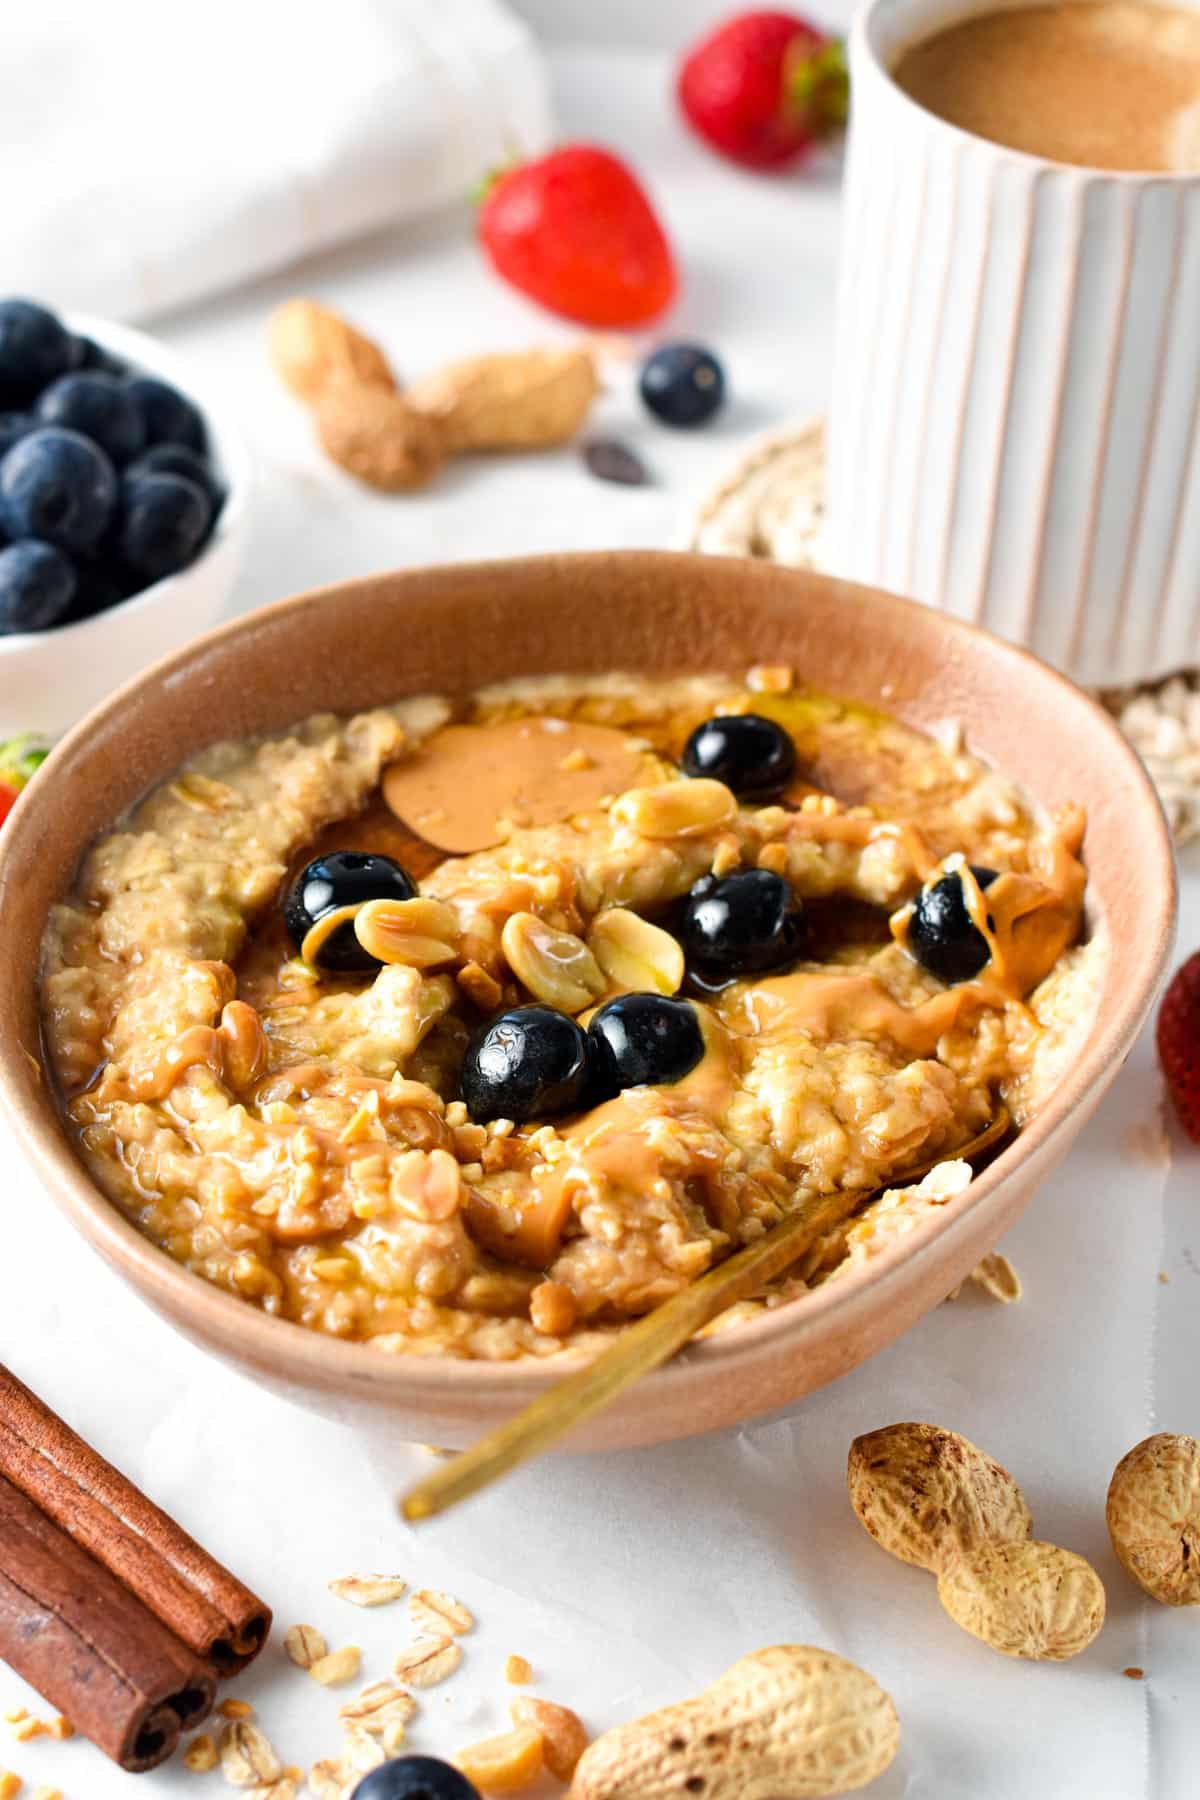 Peanut Butter Oatmeal bowl decorated with blueberries, with a golden spoon, next to fresh a stick of cinnamon and peanuts.